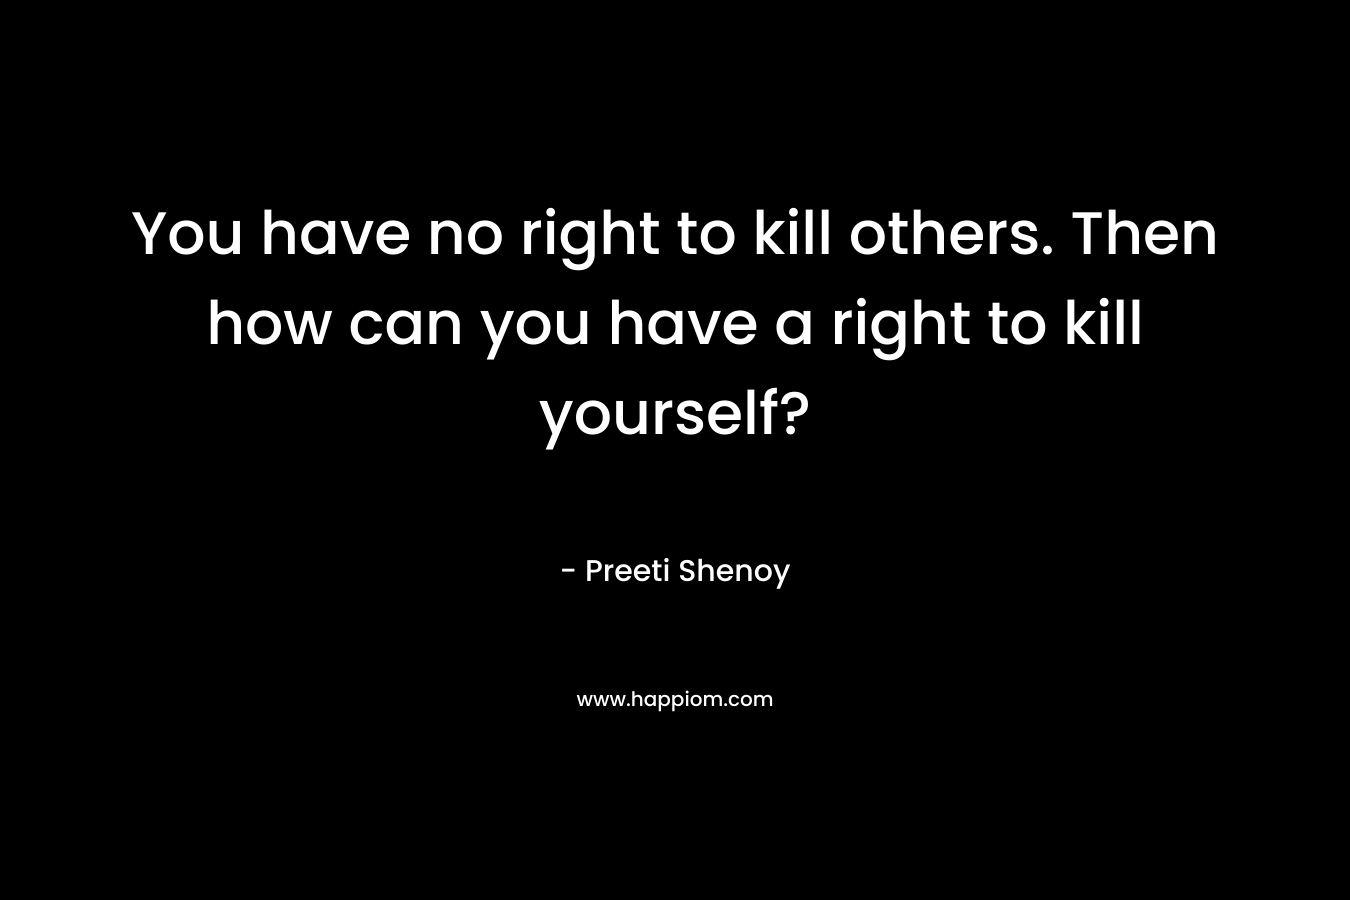 You have no right to kill others. Then how can you have a right to kill yourself? – Preeti Shenoy